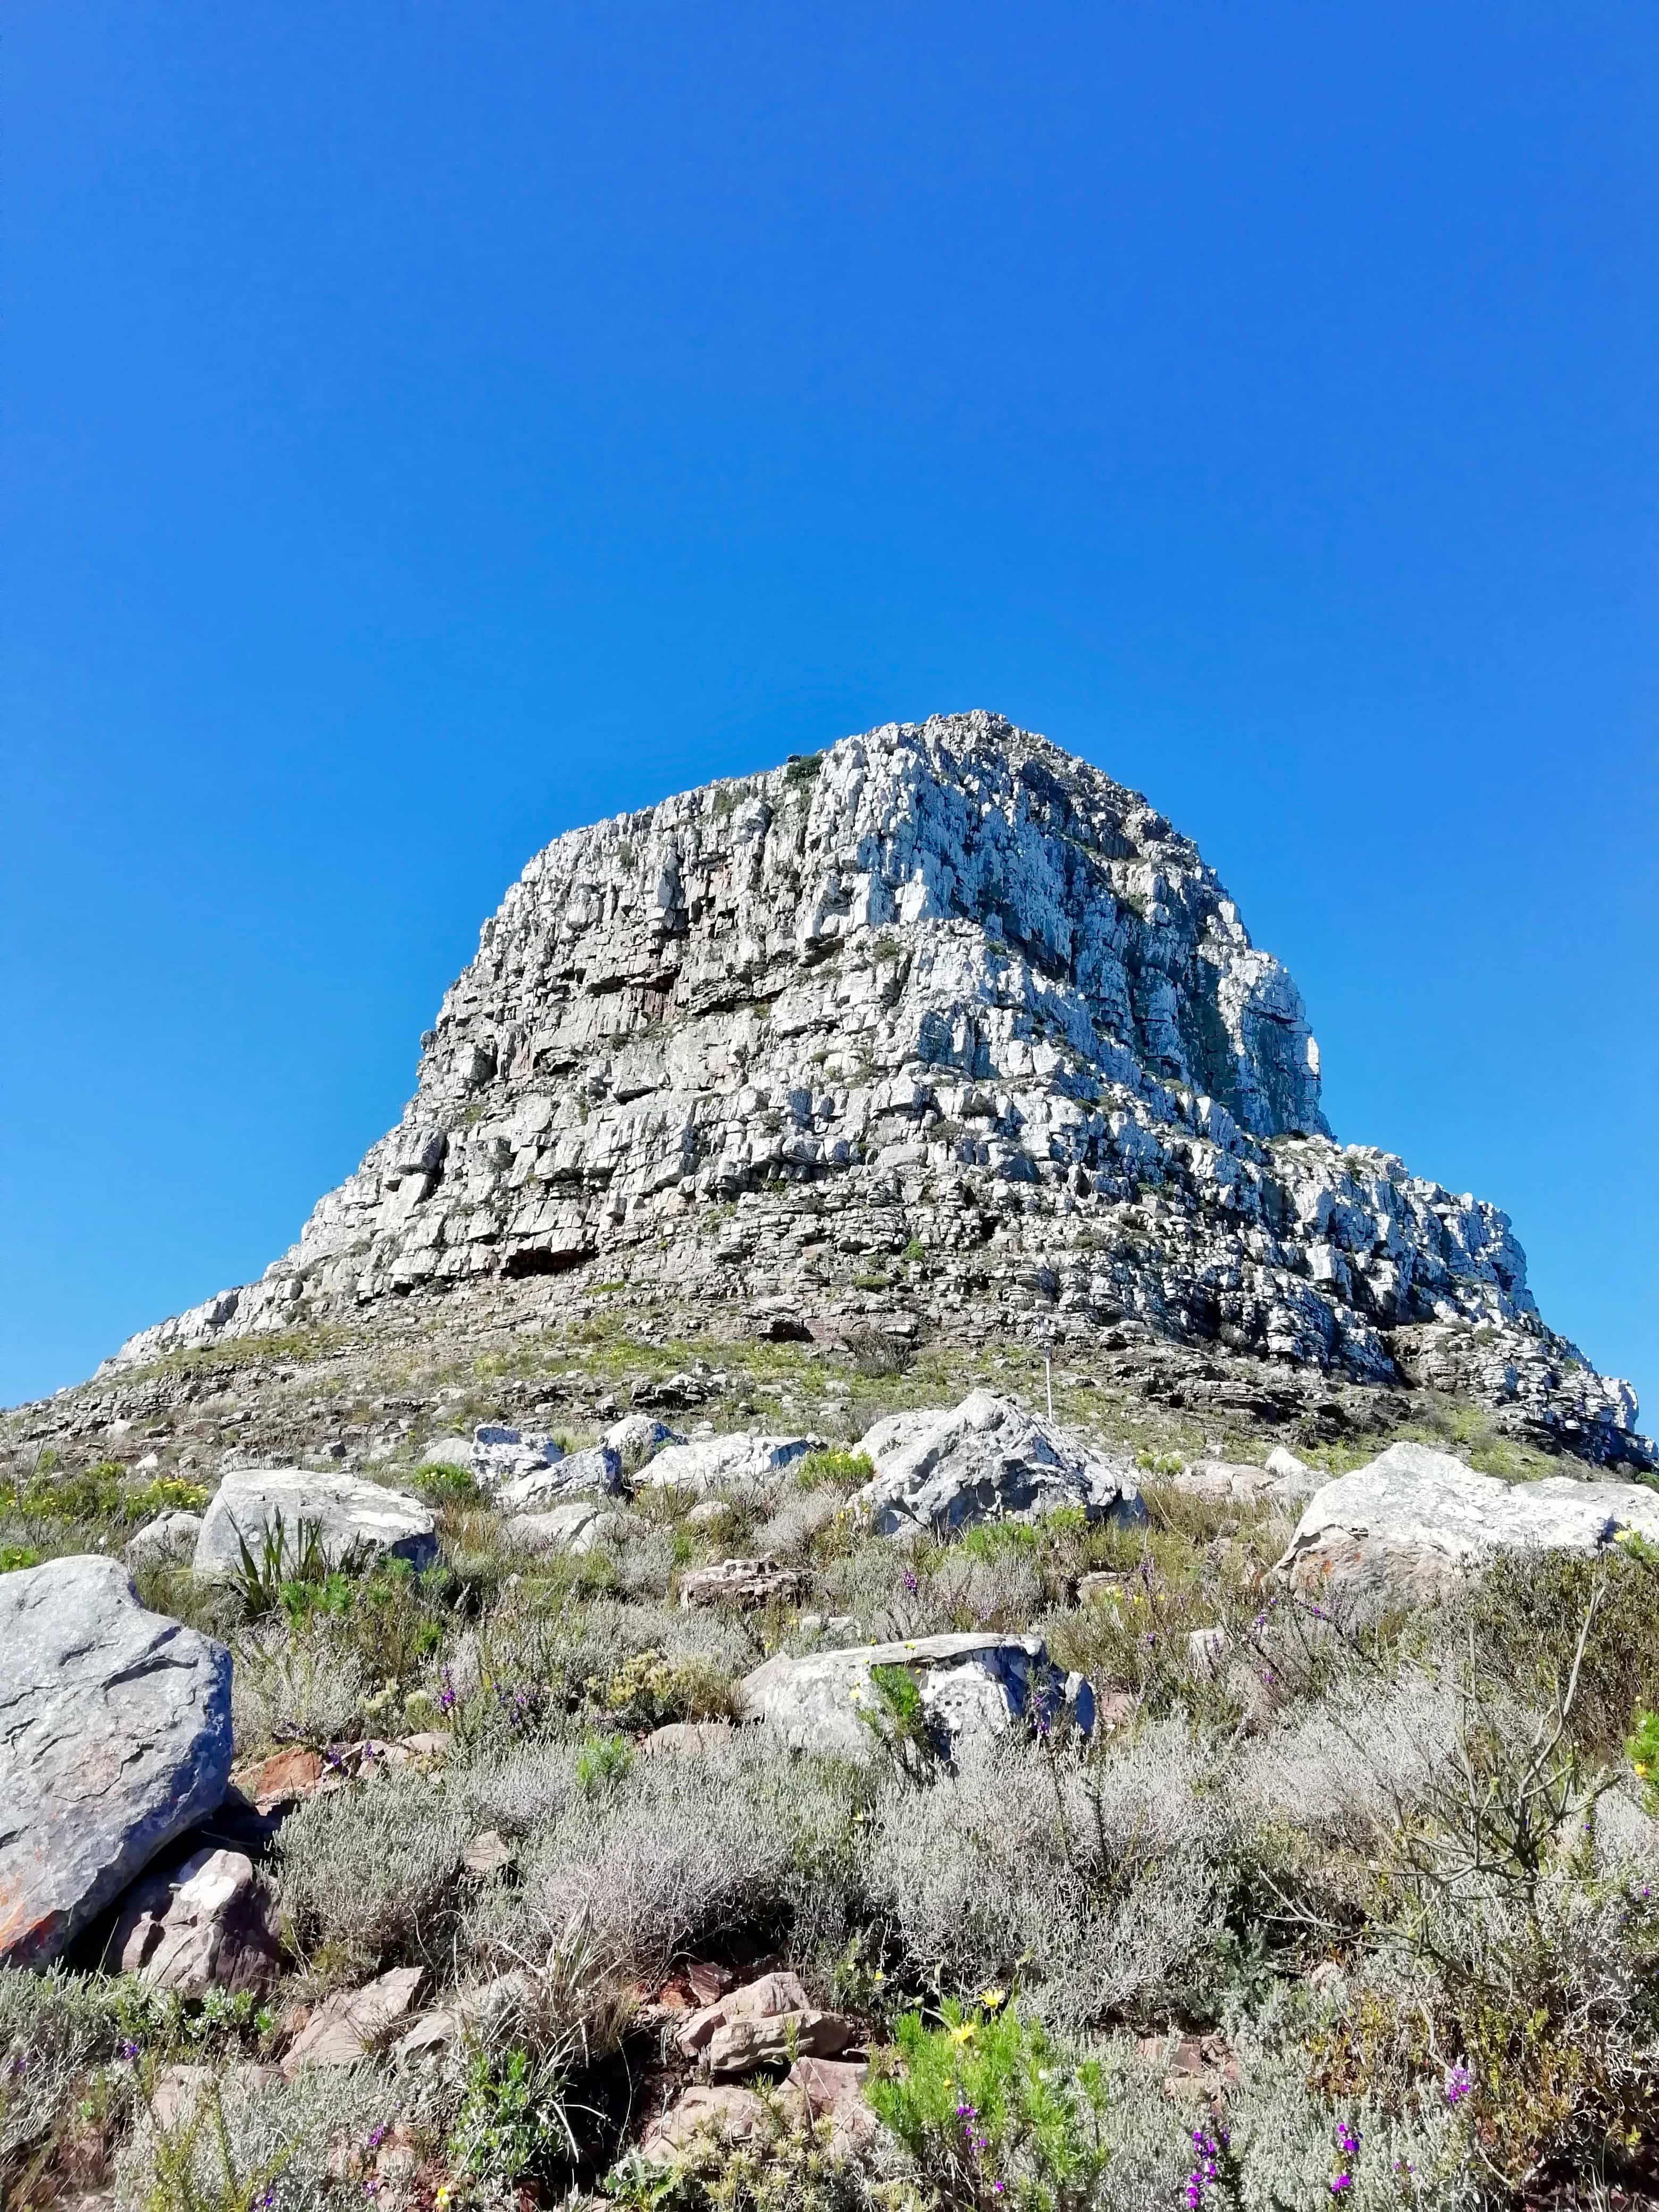 The peak of Lion's Head on the hike in Cape Town